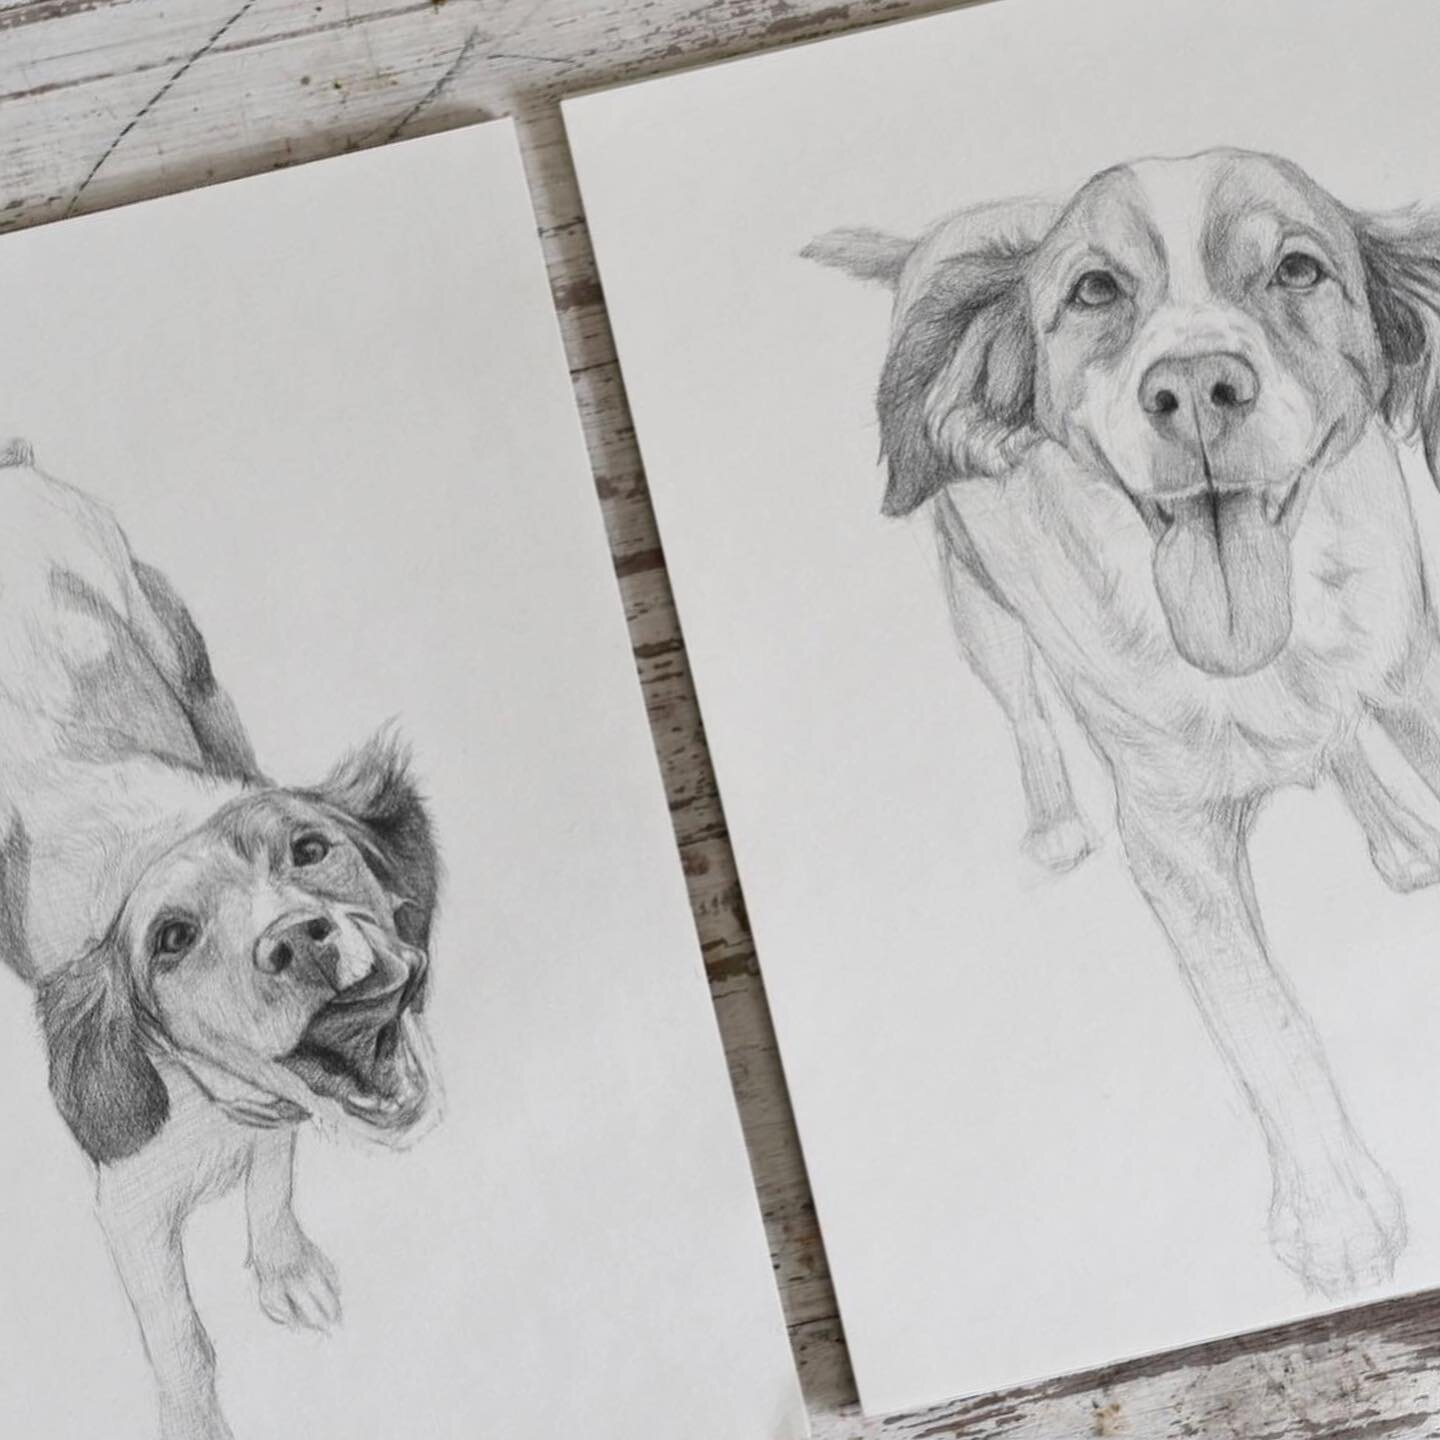 Pet portraits for some of my favorite pups 🐶 Graphite on paper.

#petportraits #brittanybirddogs  #dogsketches 
#sunsouttonguesout